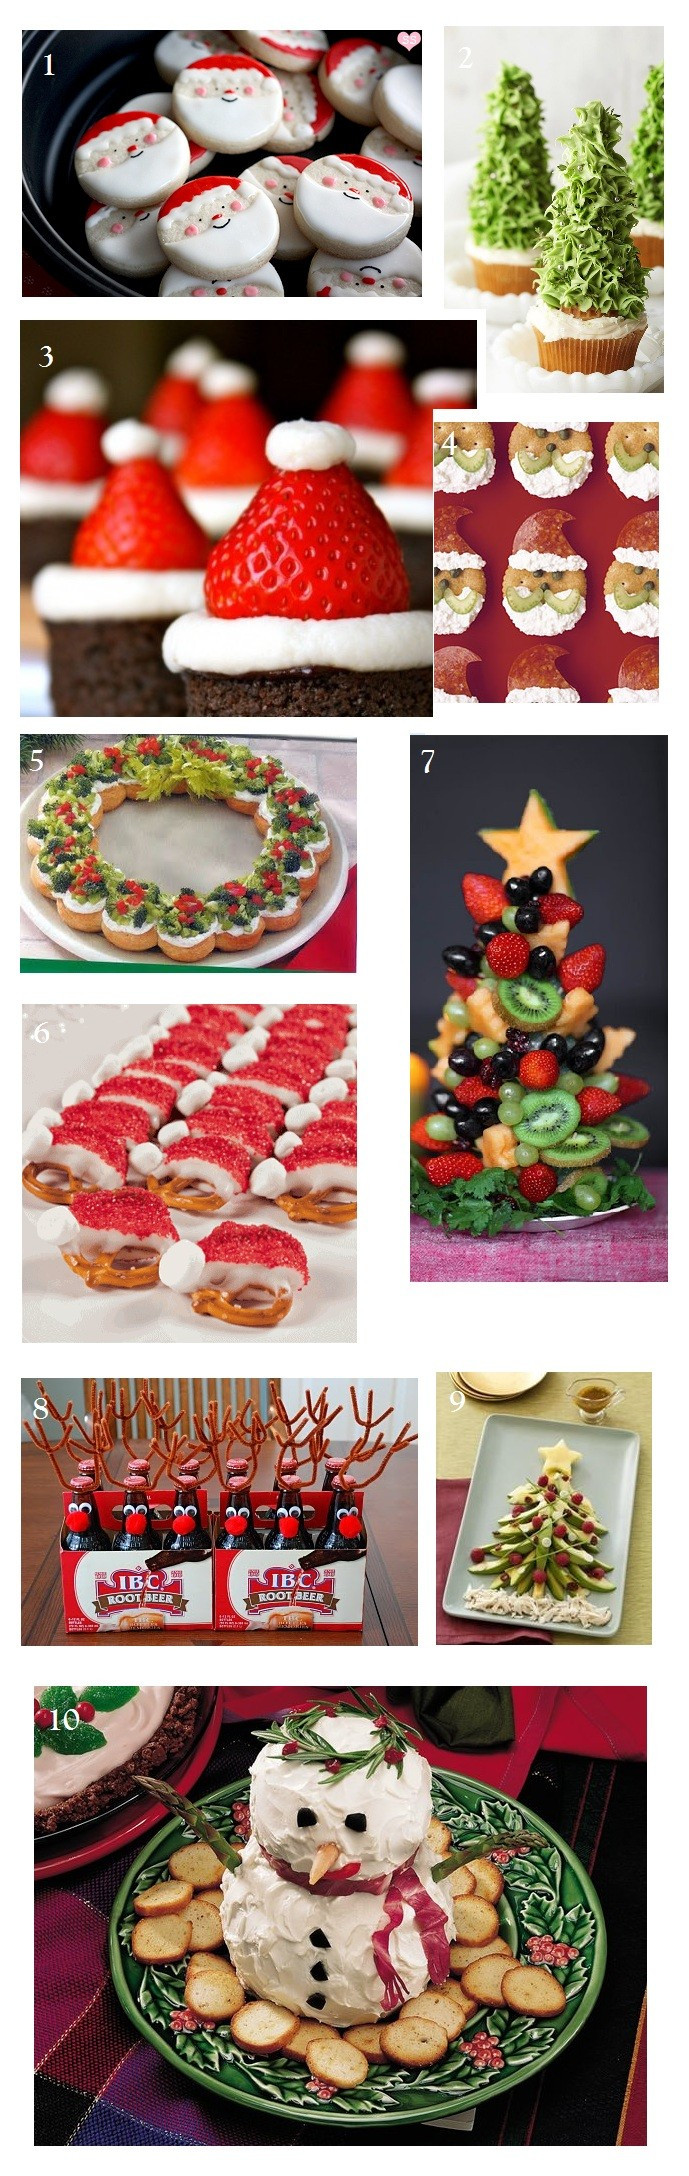 Awesome Christmas Party Ideas
 10 Awesome Christmas Party and Holiday Food Ideas and Recipes